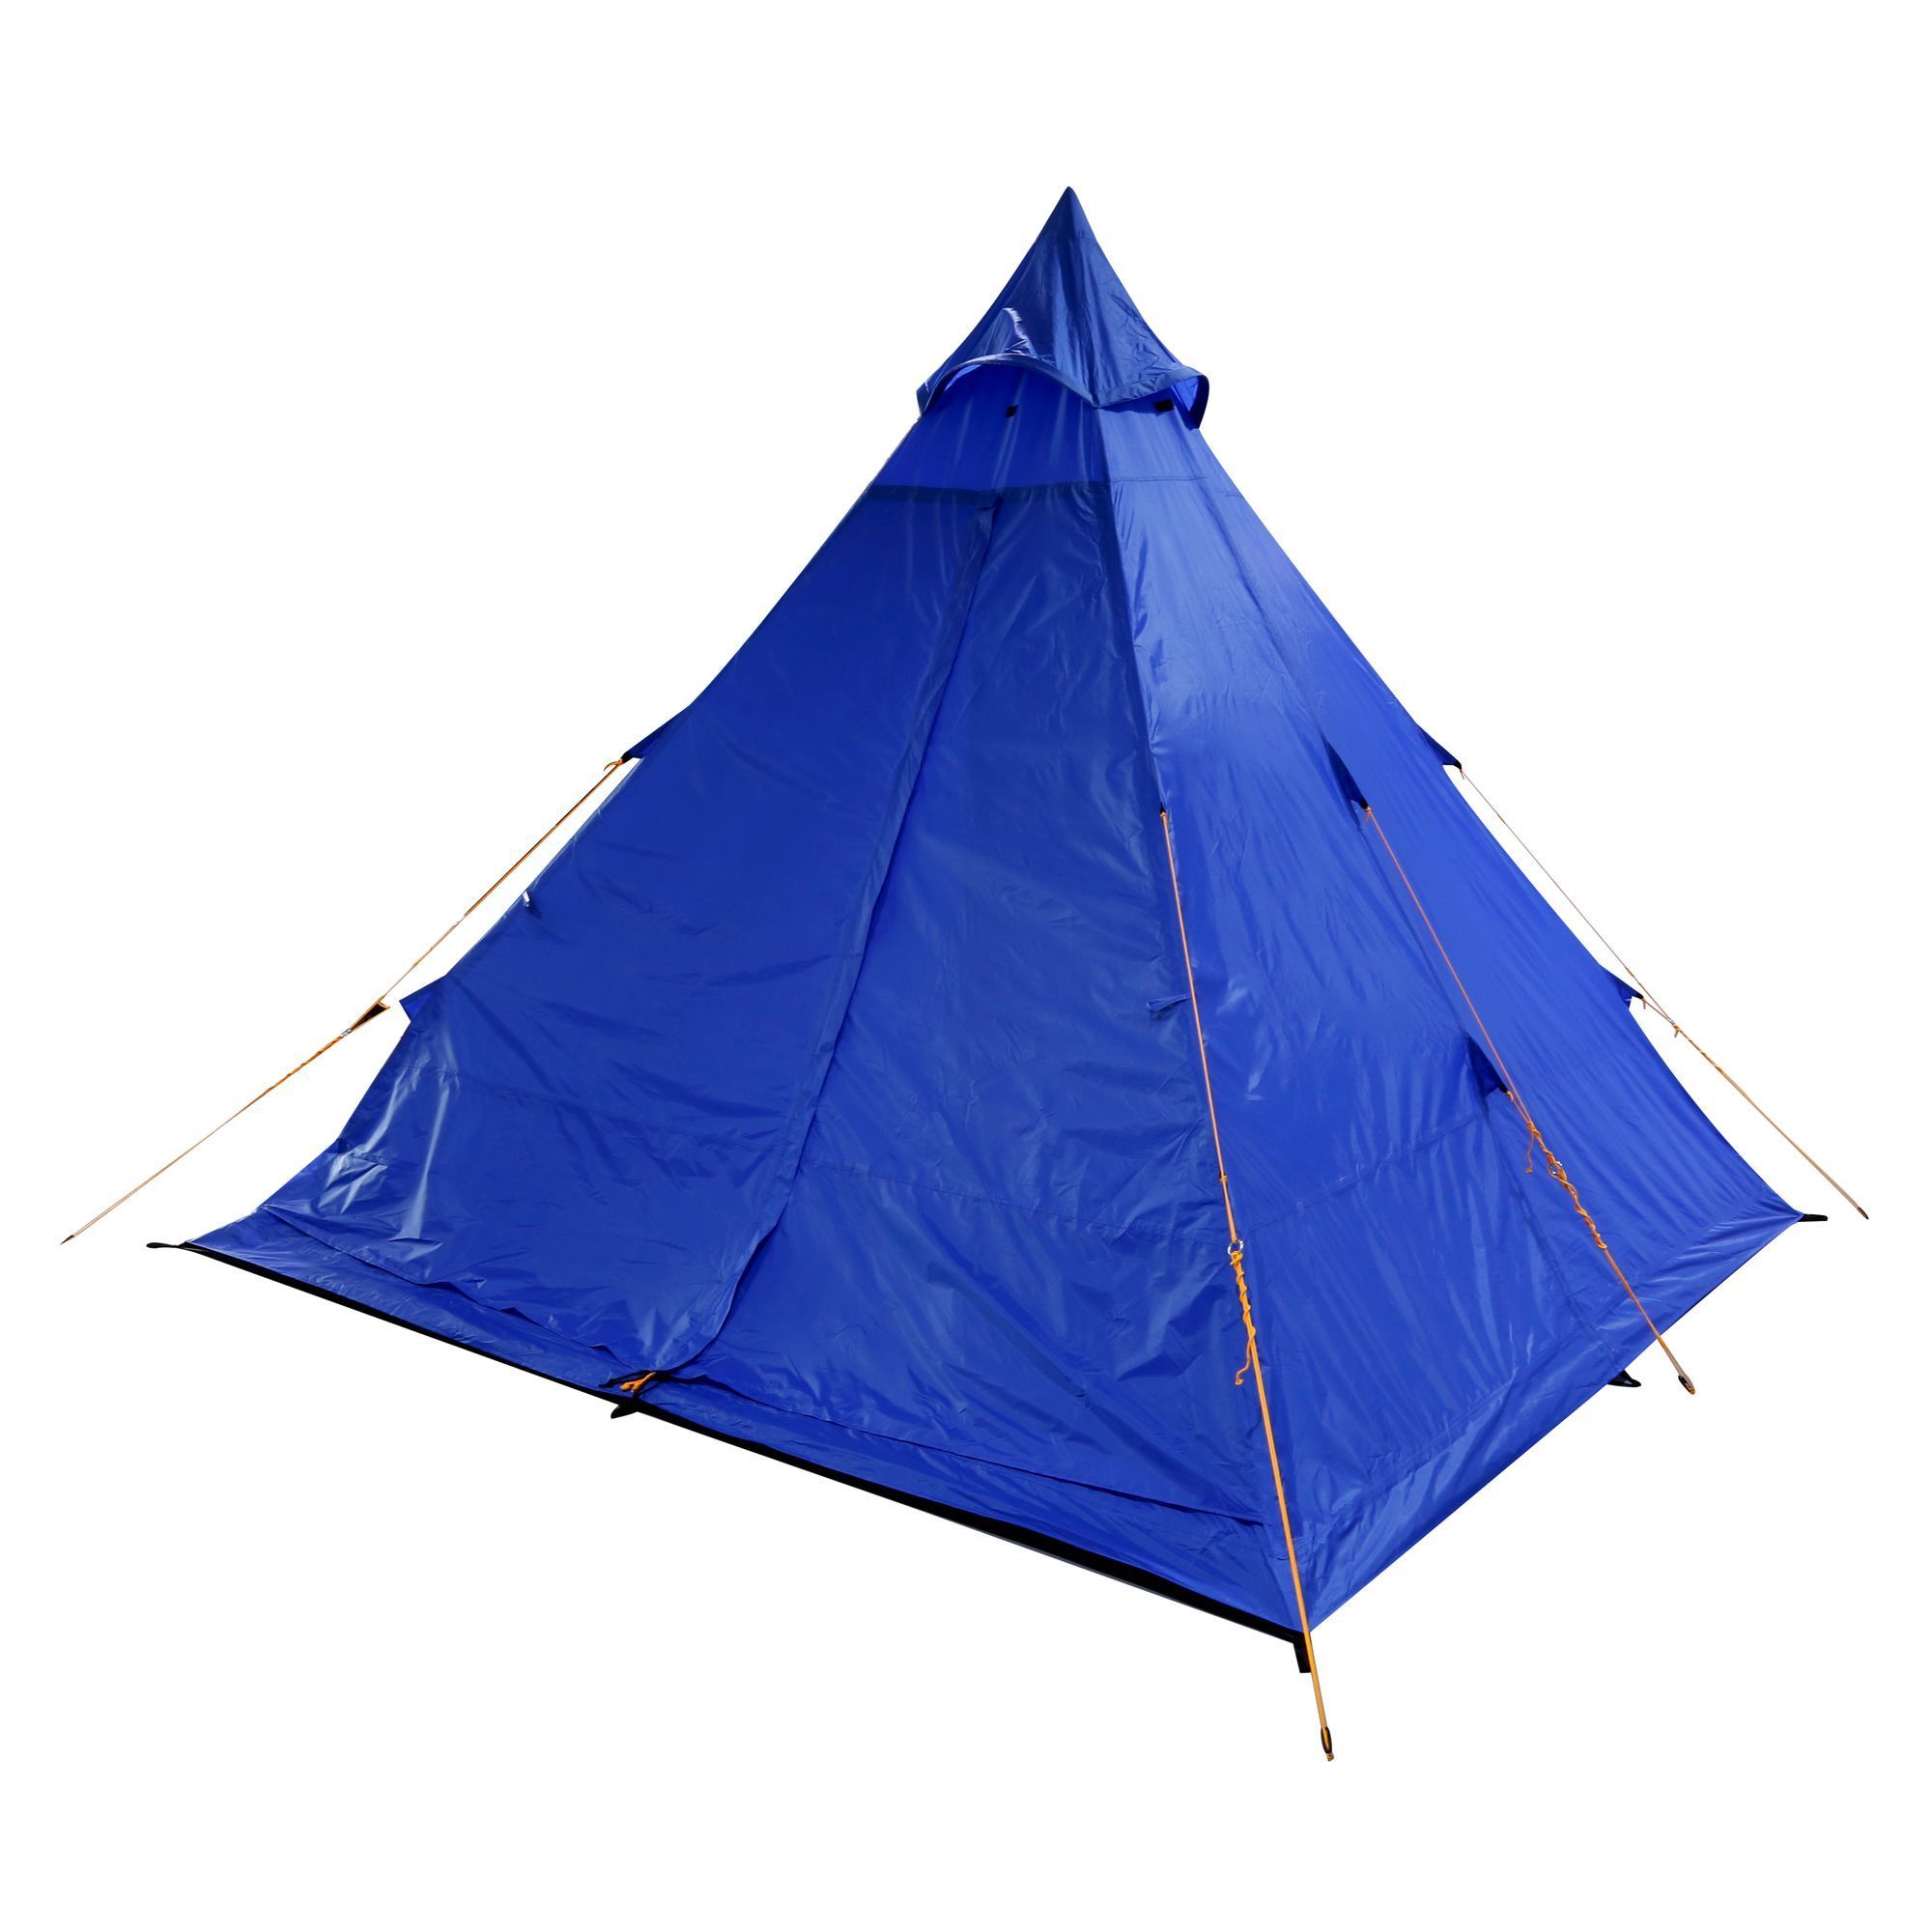 100% polyester. 4 man capacity. Waterproof hydrofort 70D flysheet with 2000mm hydrostatic head. Durable steel frame. Hardwearing, waterproof PE groundsheet with 10,000mm hydrostatic head. Practically positioned internal pockets. Bright guy lines for extra visibility. Fully fire retardant fabrics. 2.8 x 2.8 x 2.35m.